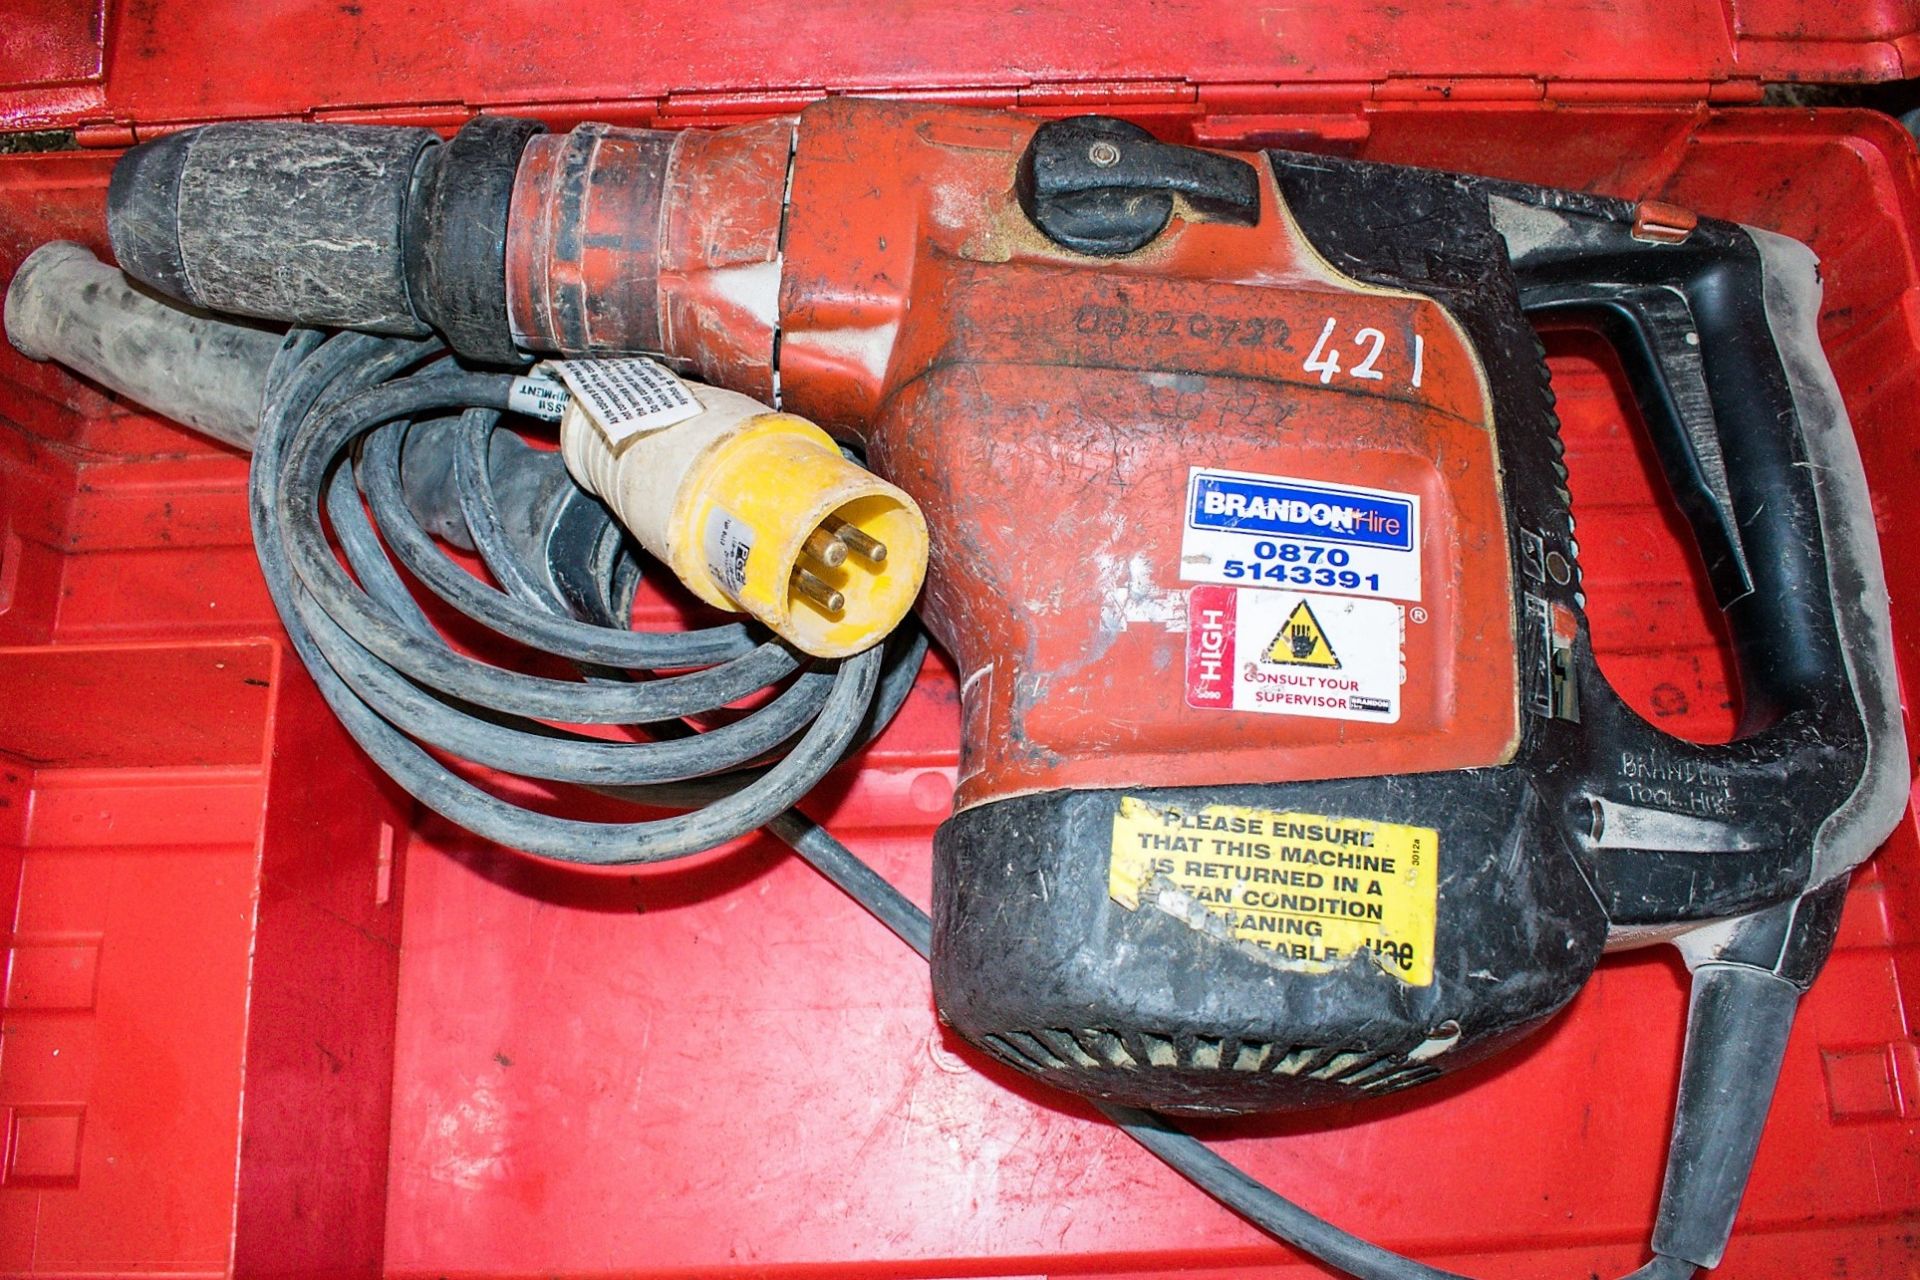 Hilti 110v rotary SDS rotary hammer drill c/w battery, charger & carry case